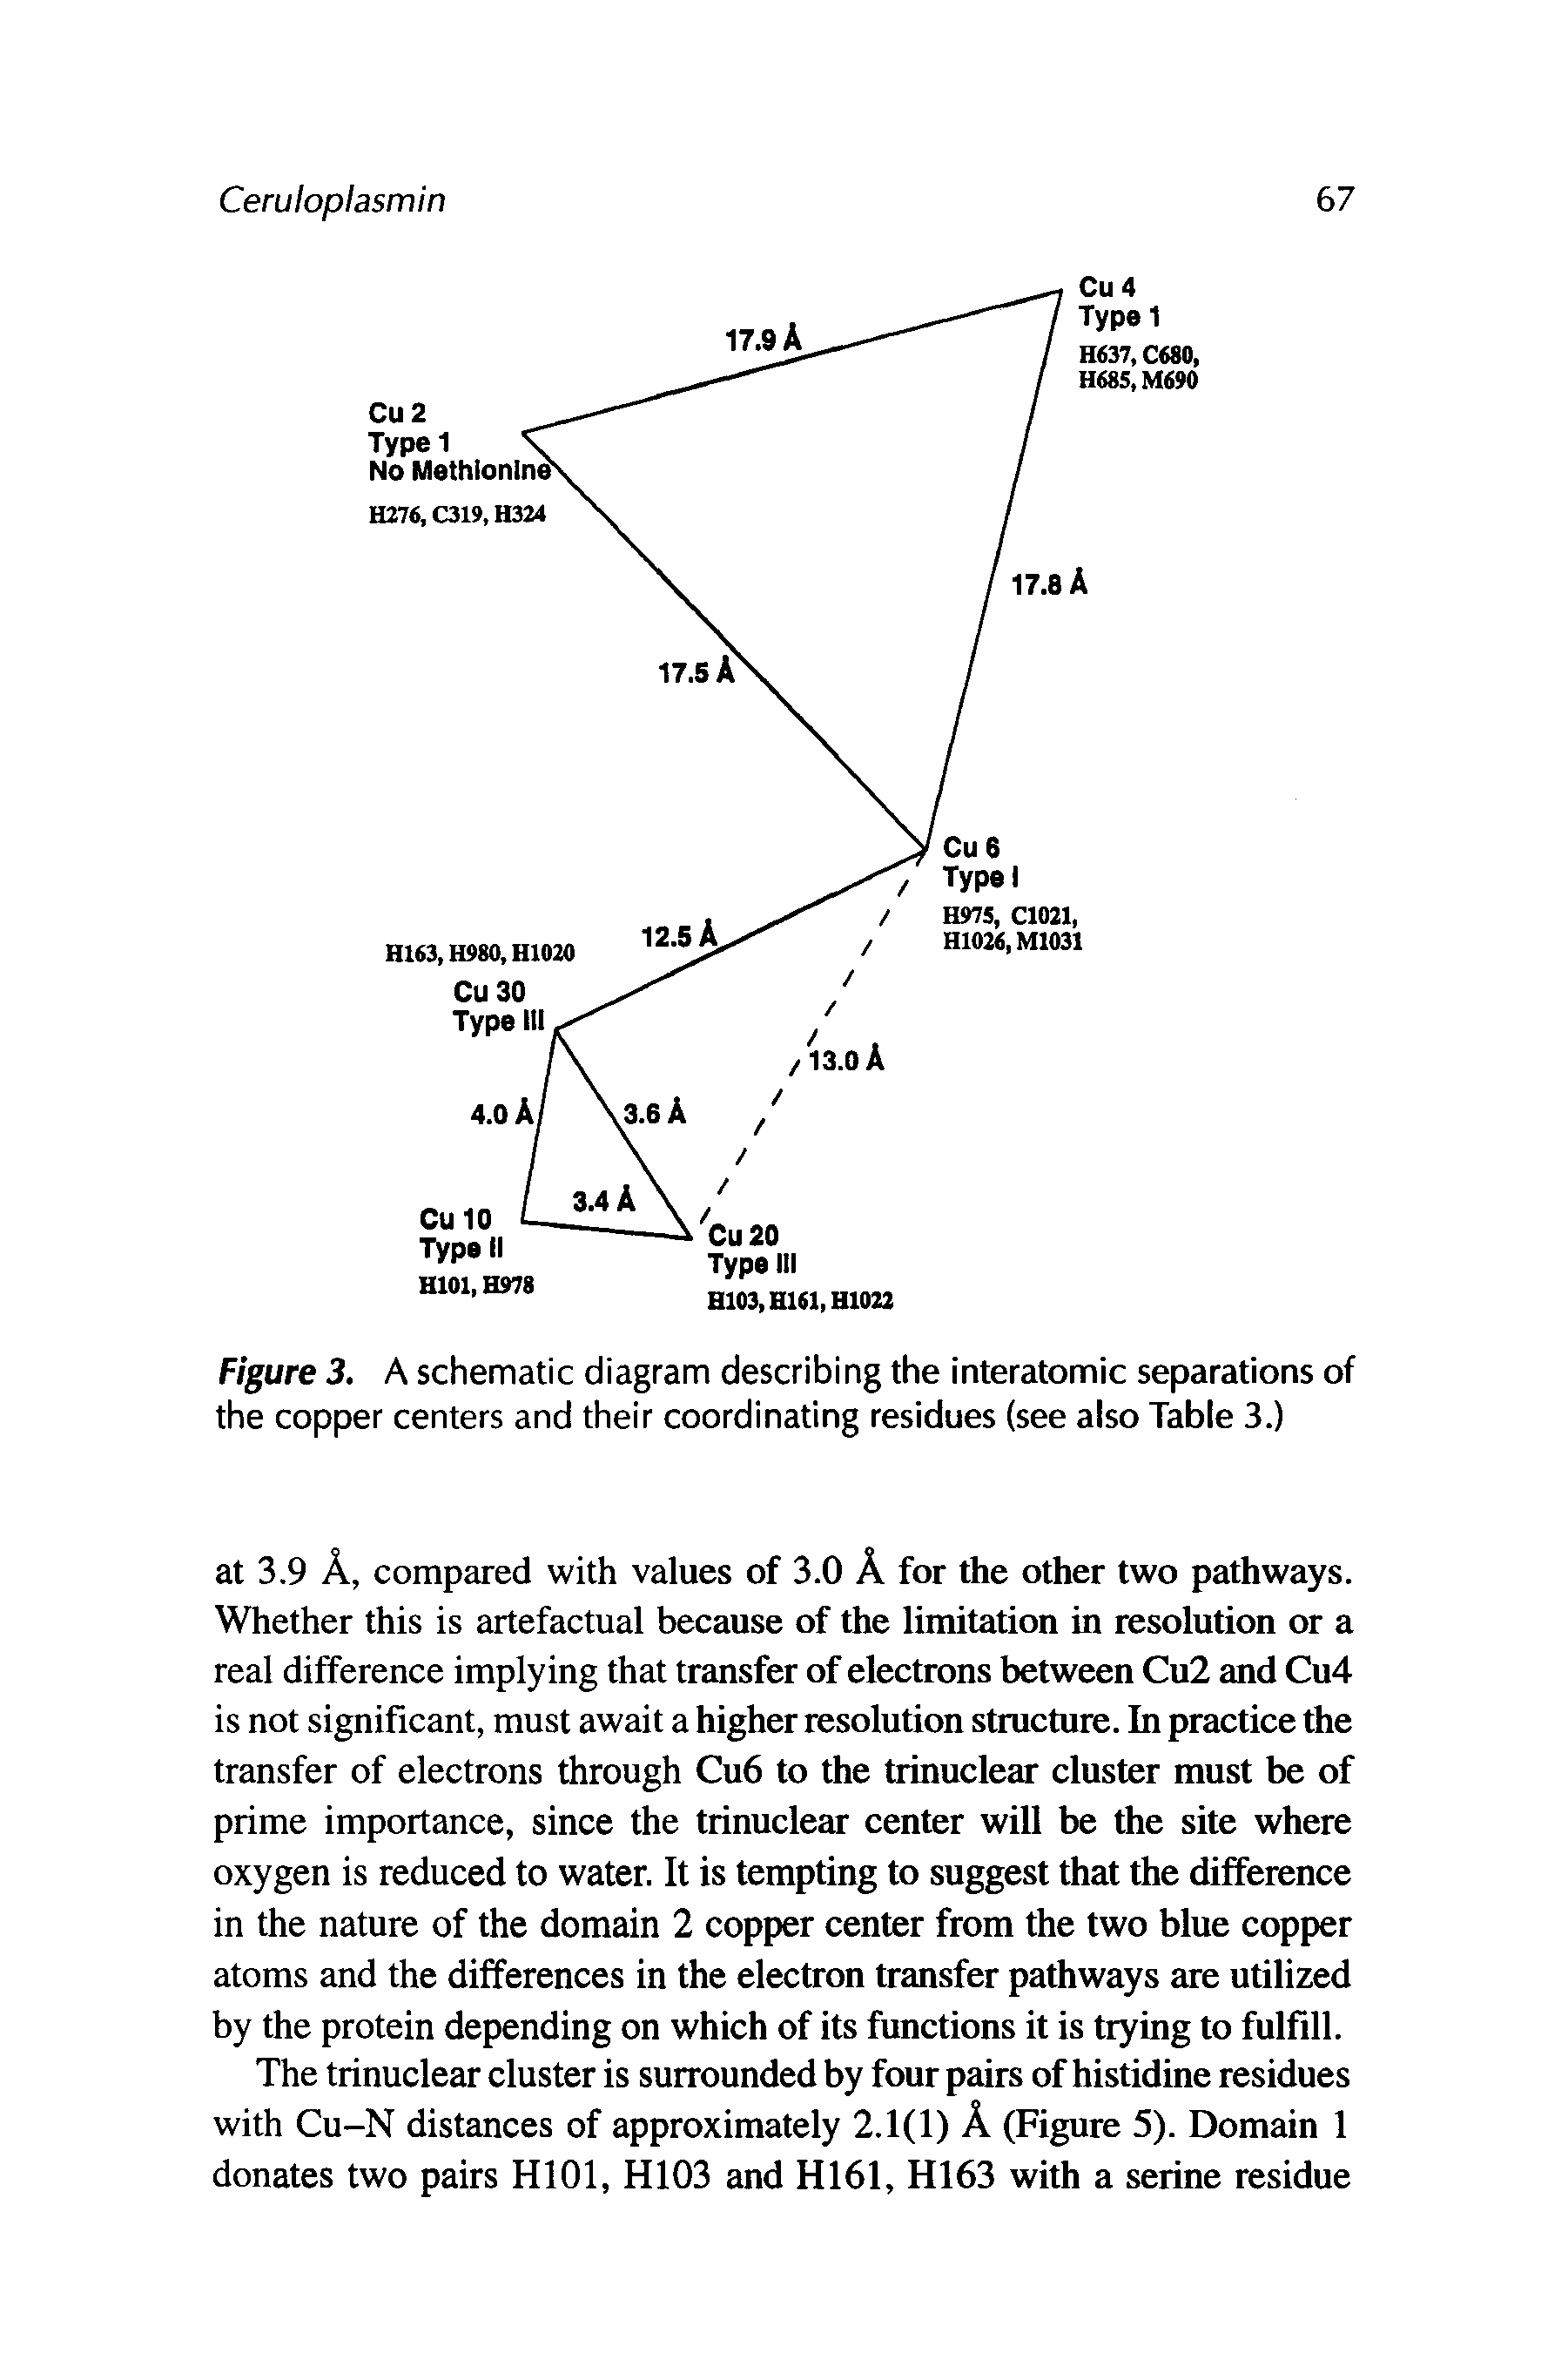 Figure 3. A schematic diagram describing the interatomic separations of the copper centers and their coordinating residues (see also Table 3.)...